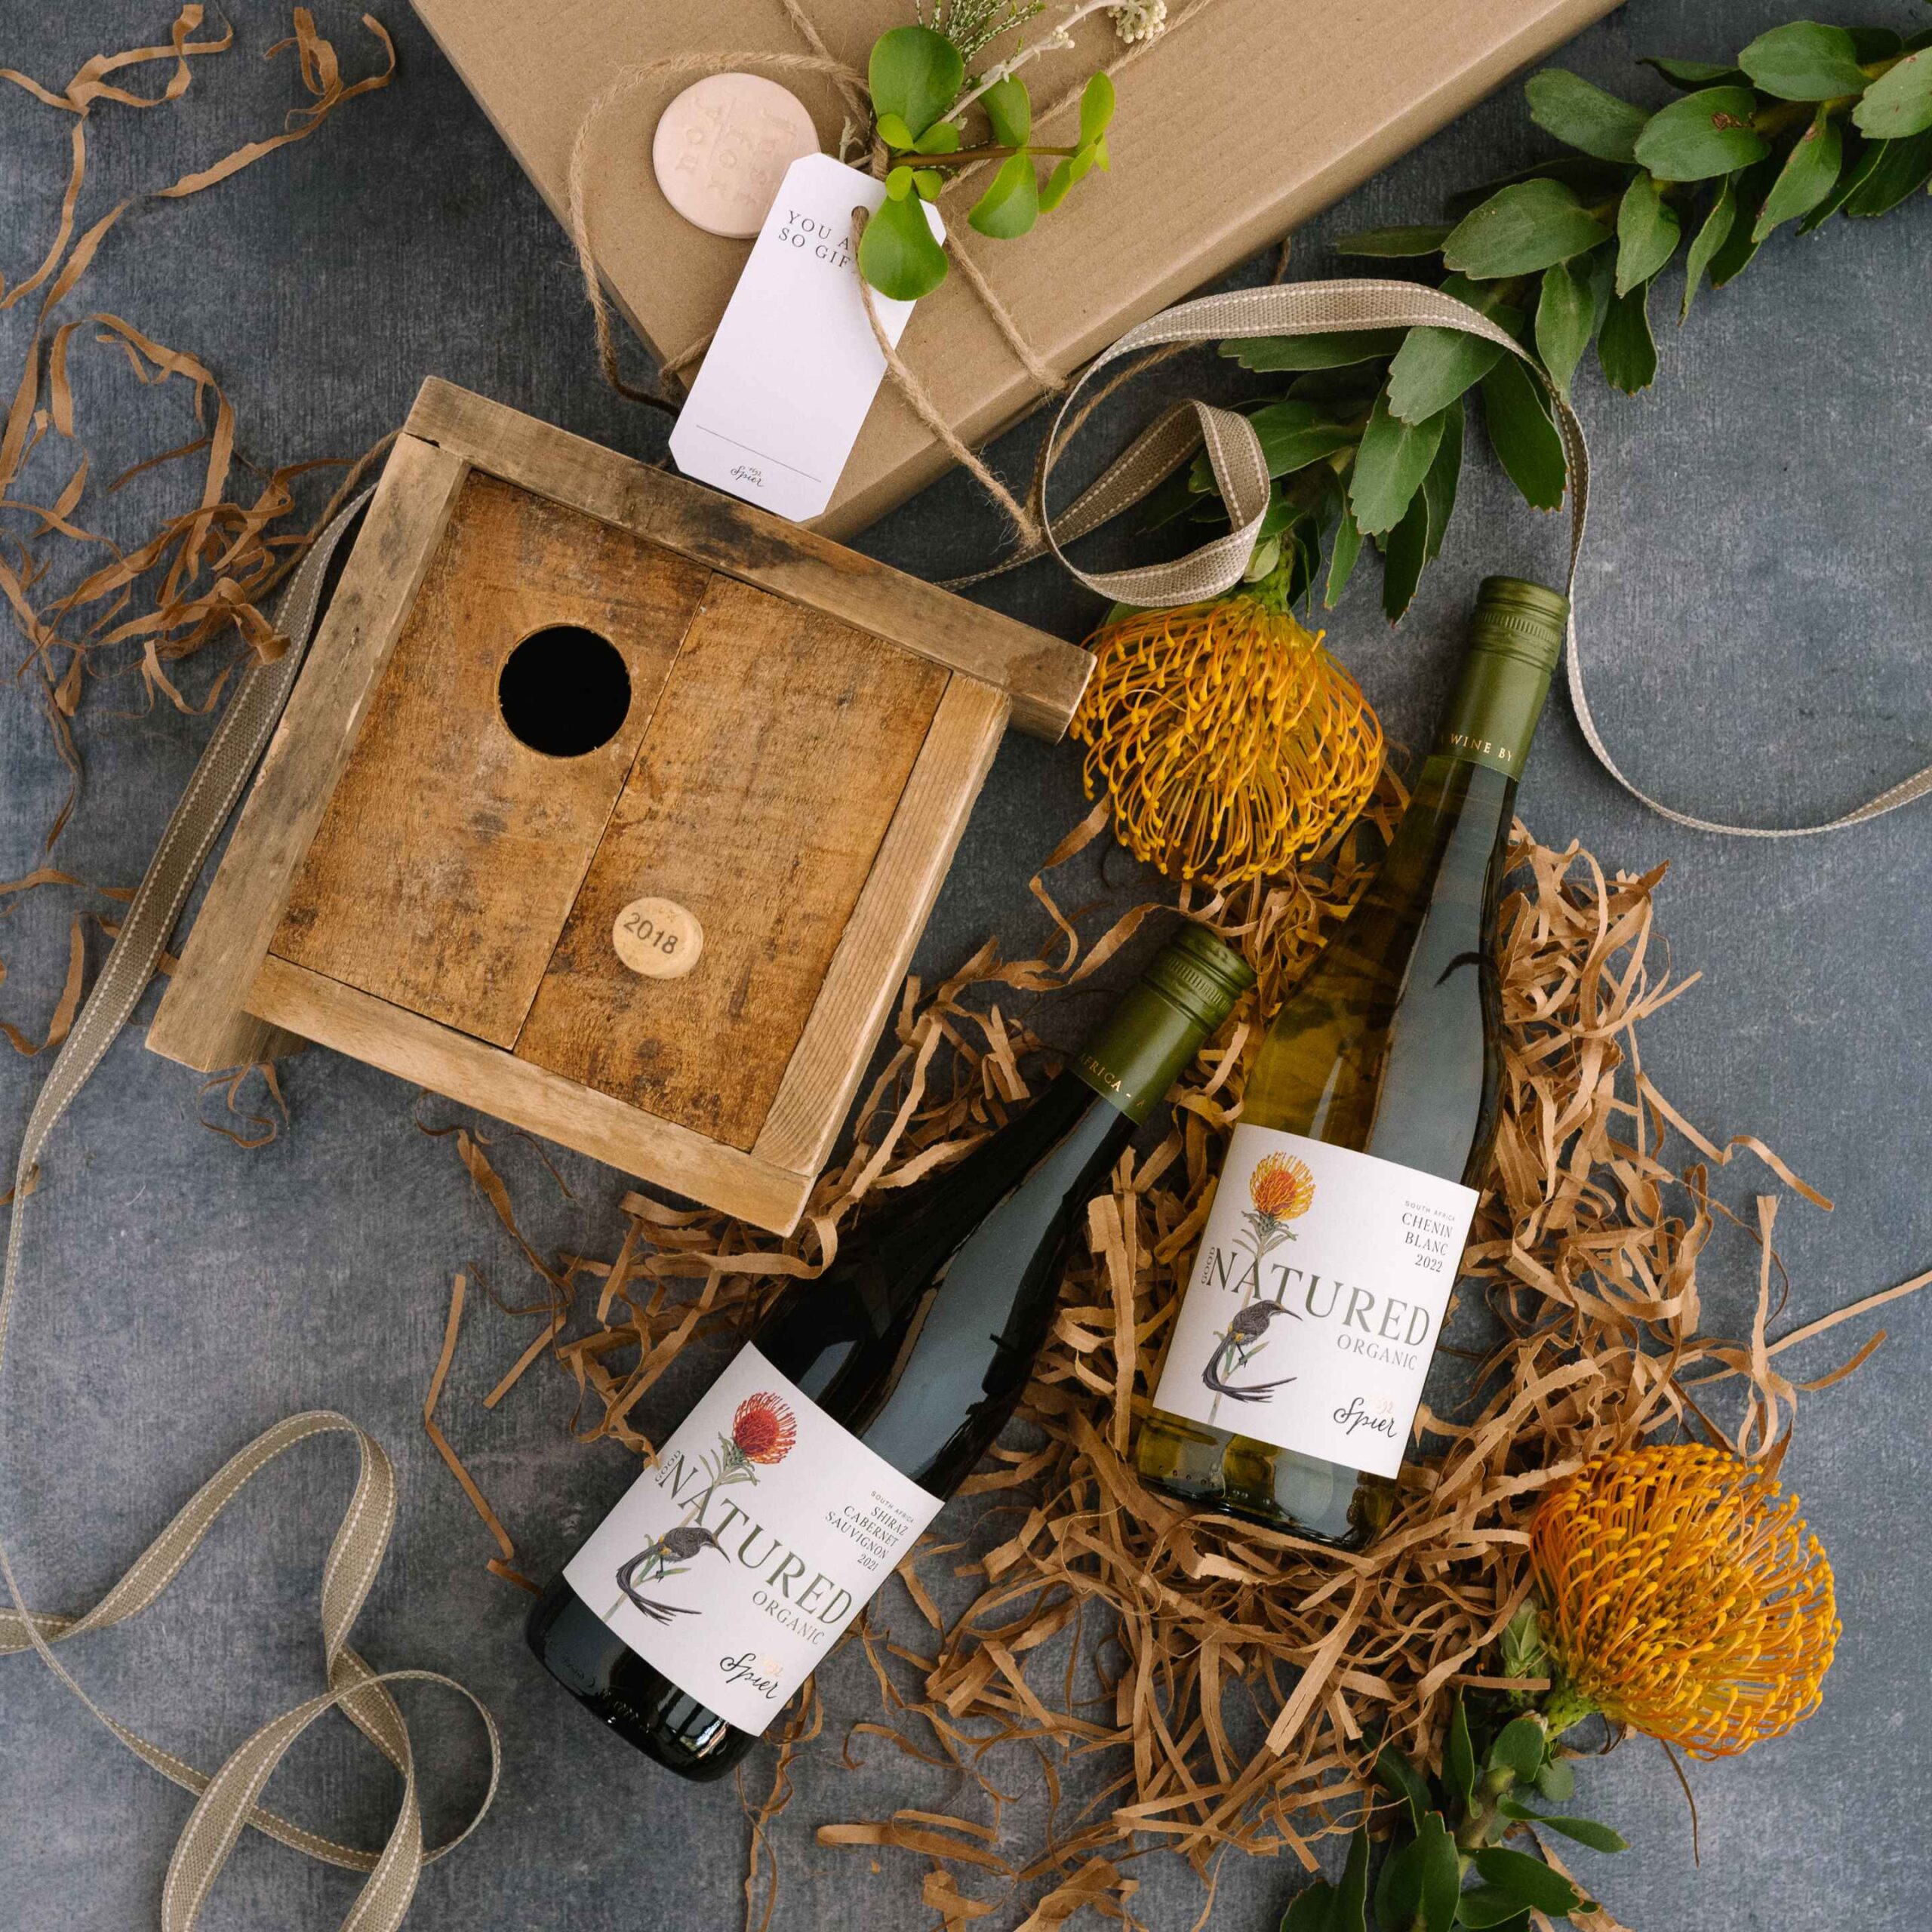 Make Your Loved One’s Happy With These Festive Gift Options From Spier Wine Farm